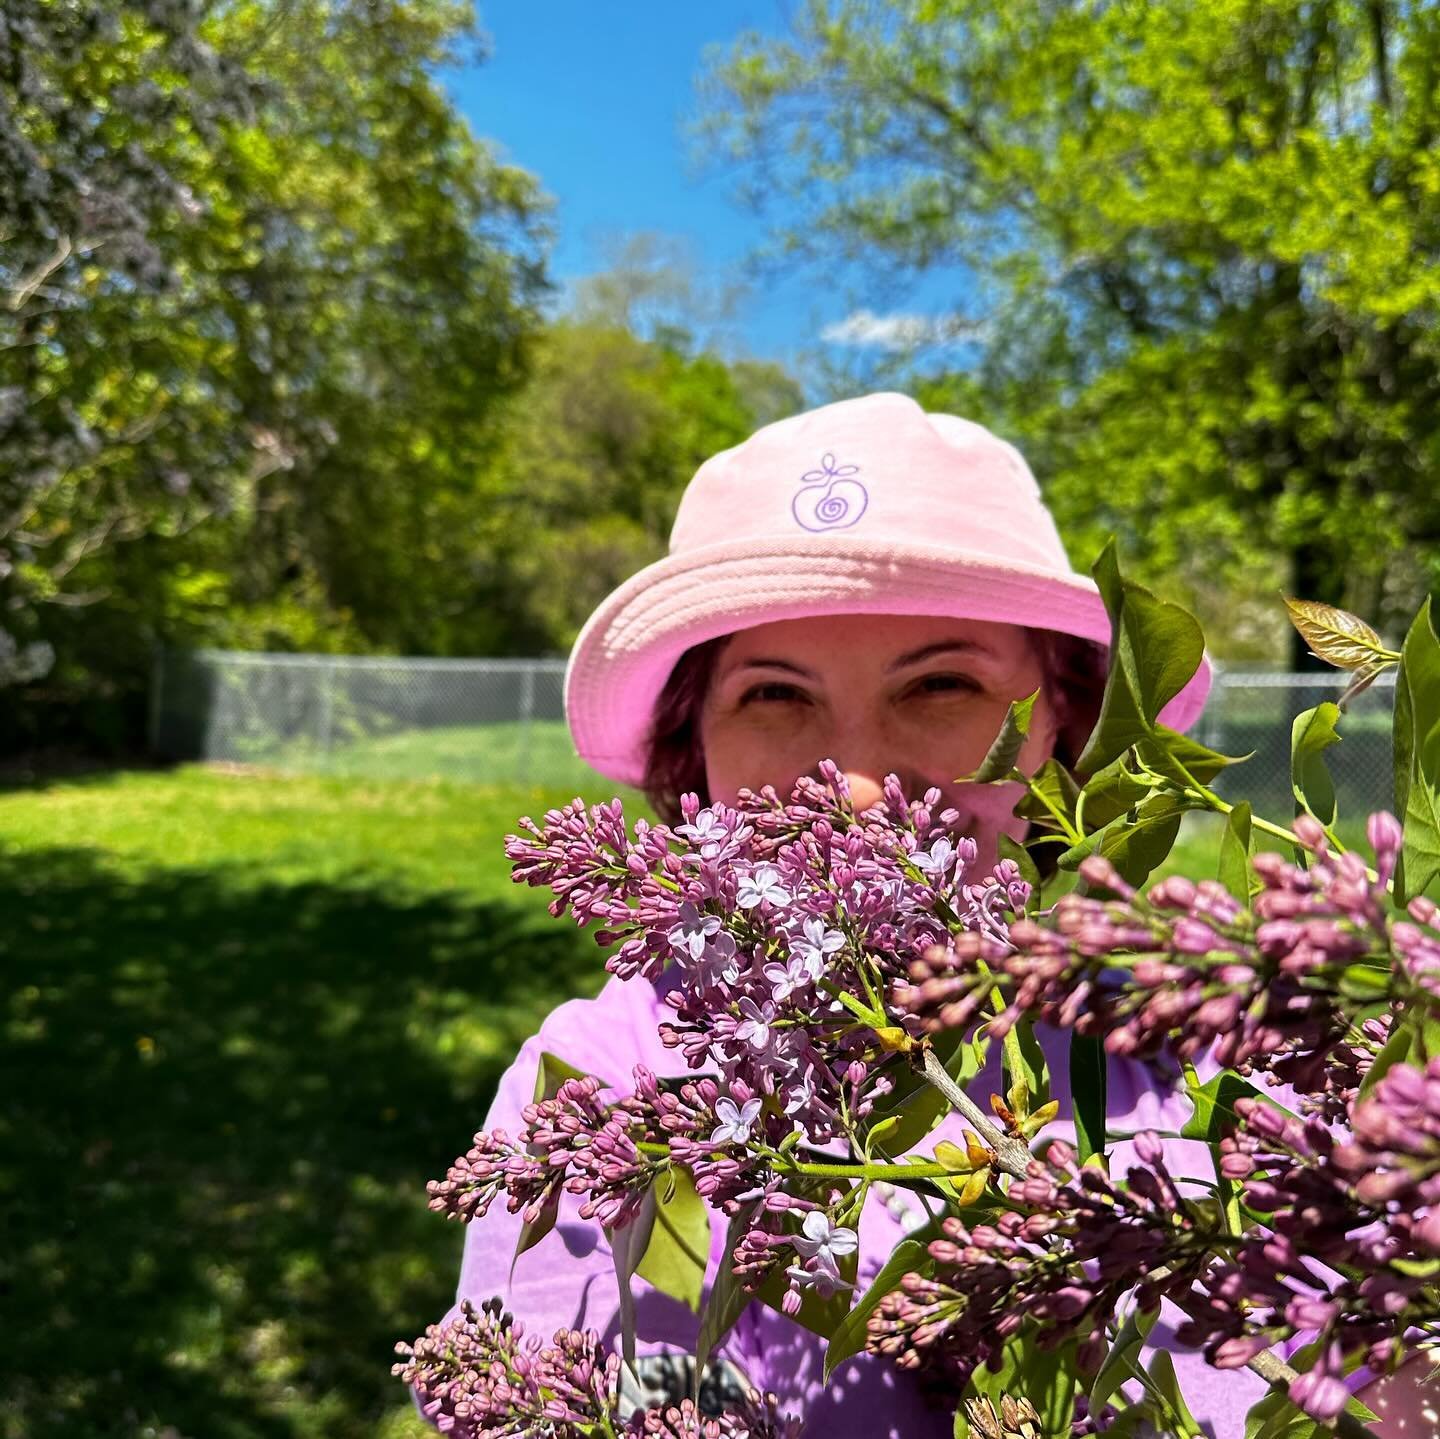 THE EARTH LAUGHS IN FLOWERS AND I LAUGH IN DAISY-CHAINS OF SILLY THOUGHTS 🌼⛓️🤪

WHAT IS LIFE BUT FLEETING MOMENTS LIKE THE LIFE OF A LILAC TREE/BUSH/SHRUB ?!?!?